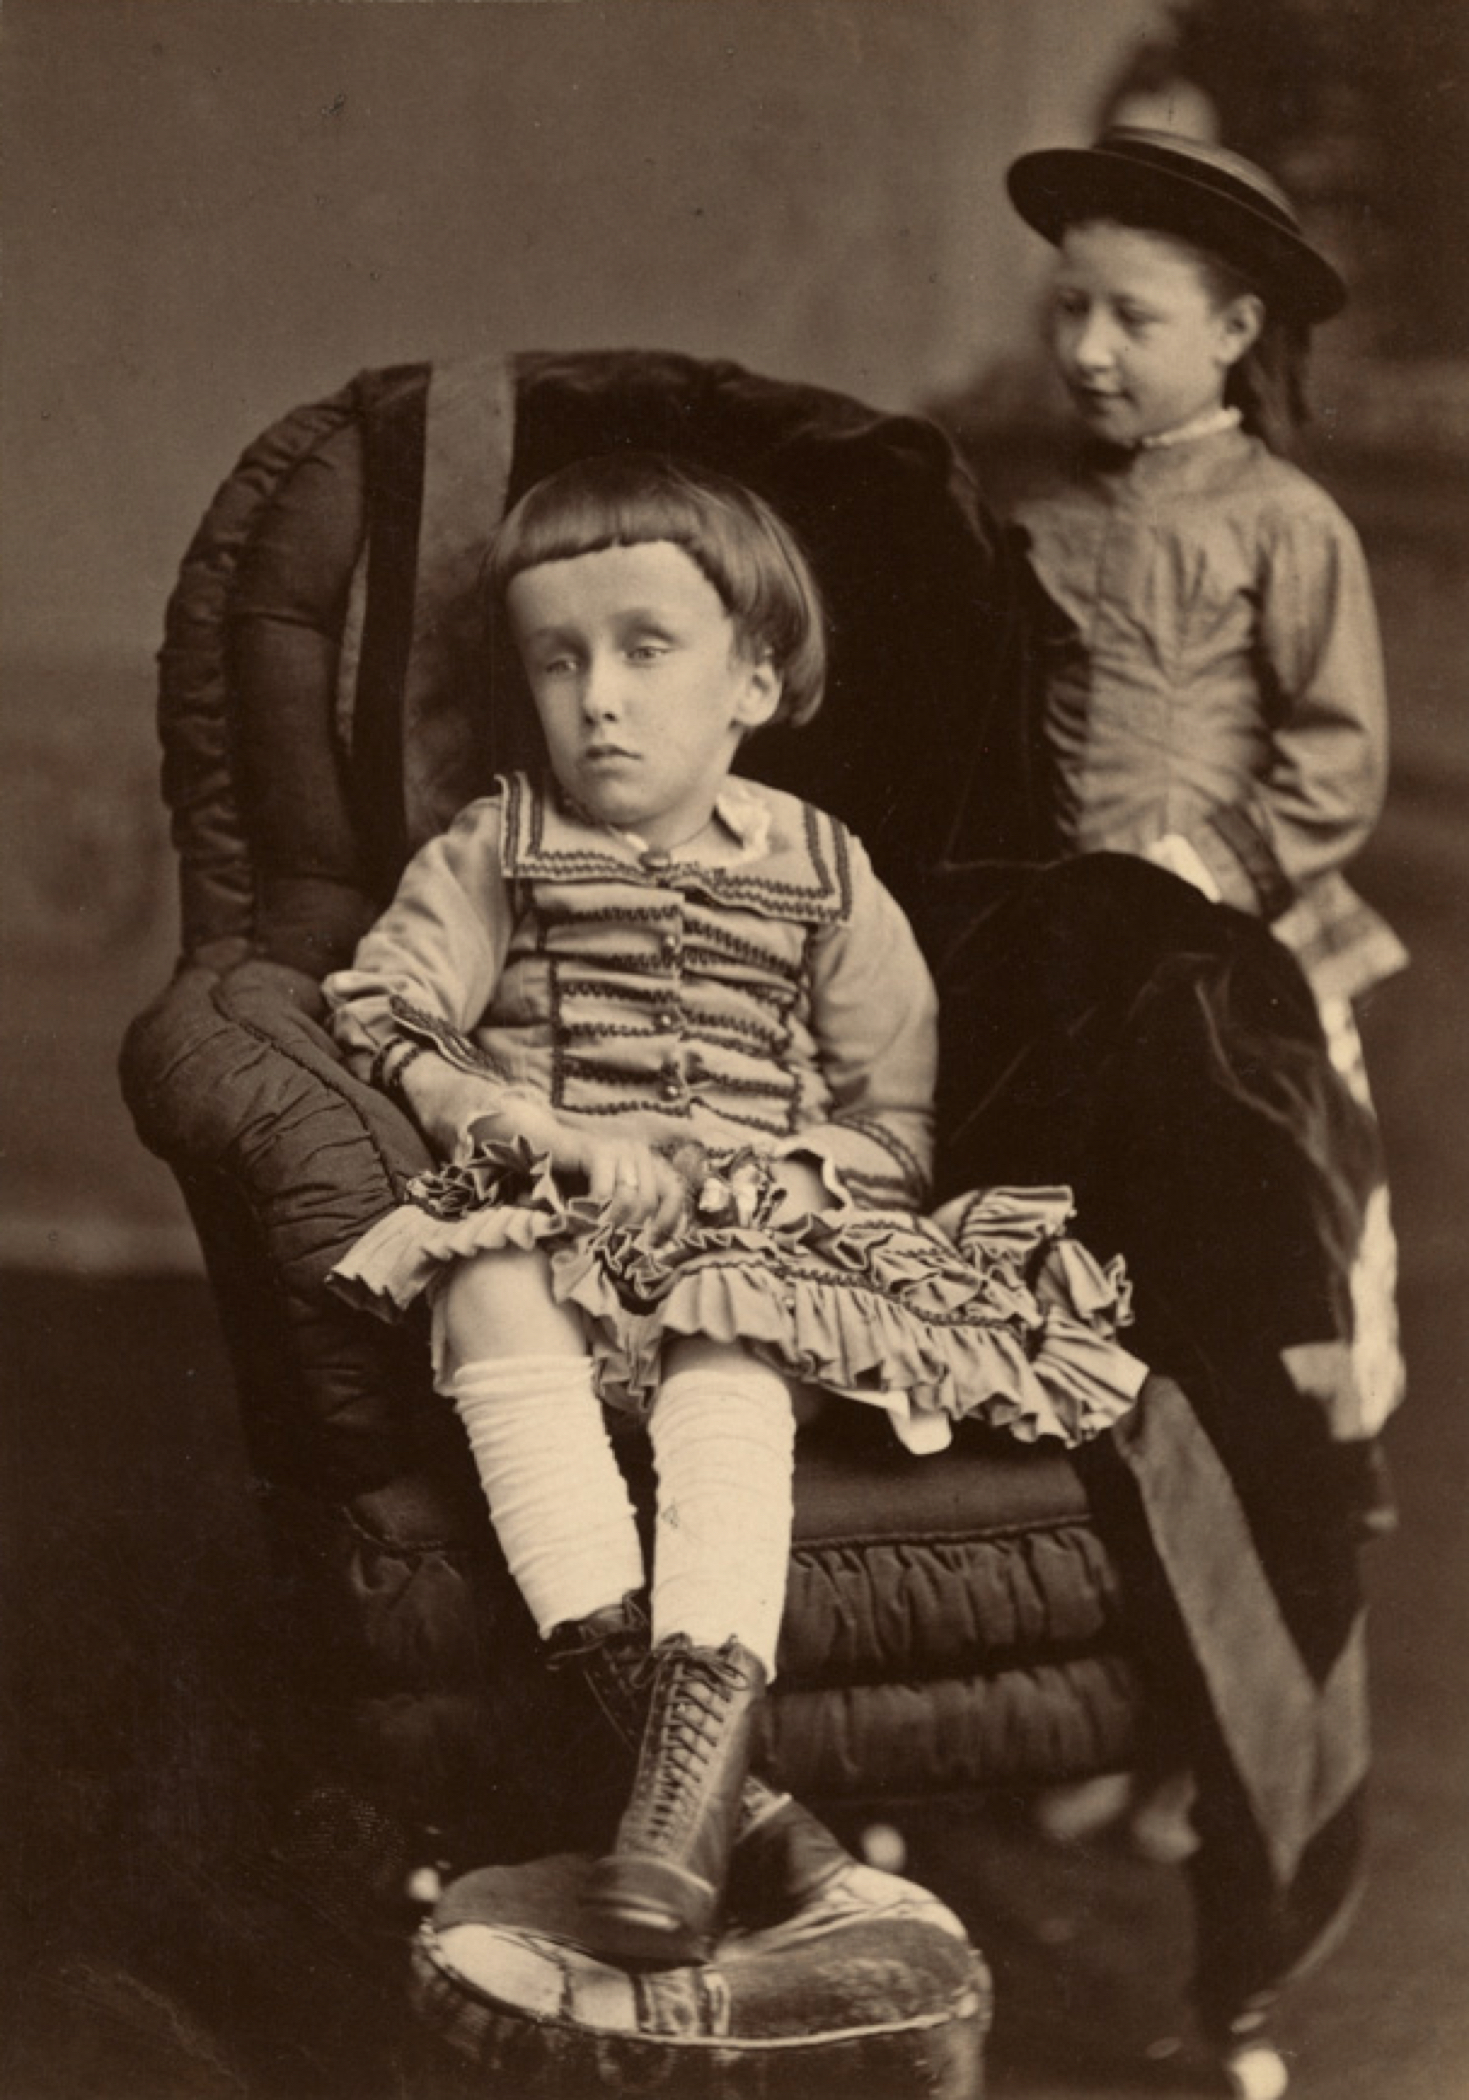 Black and white photograph of Mary Macdonald, a small child, propped up in a chair with her legs crossed in front of her, with a vacant expression on her face. Her head is abnormally large and she has dark hair combed down in bangs over her forehead.